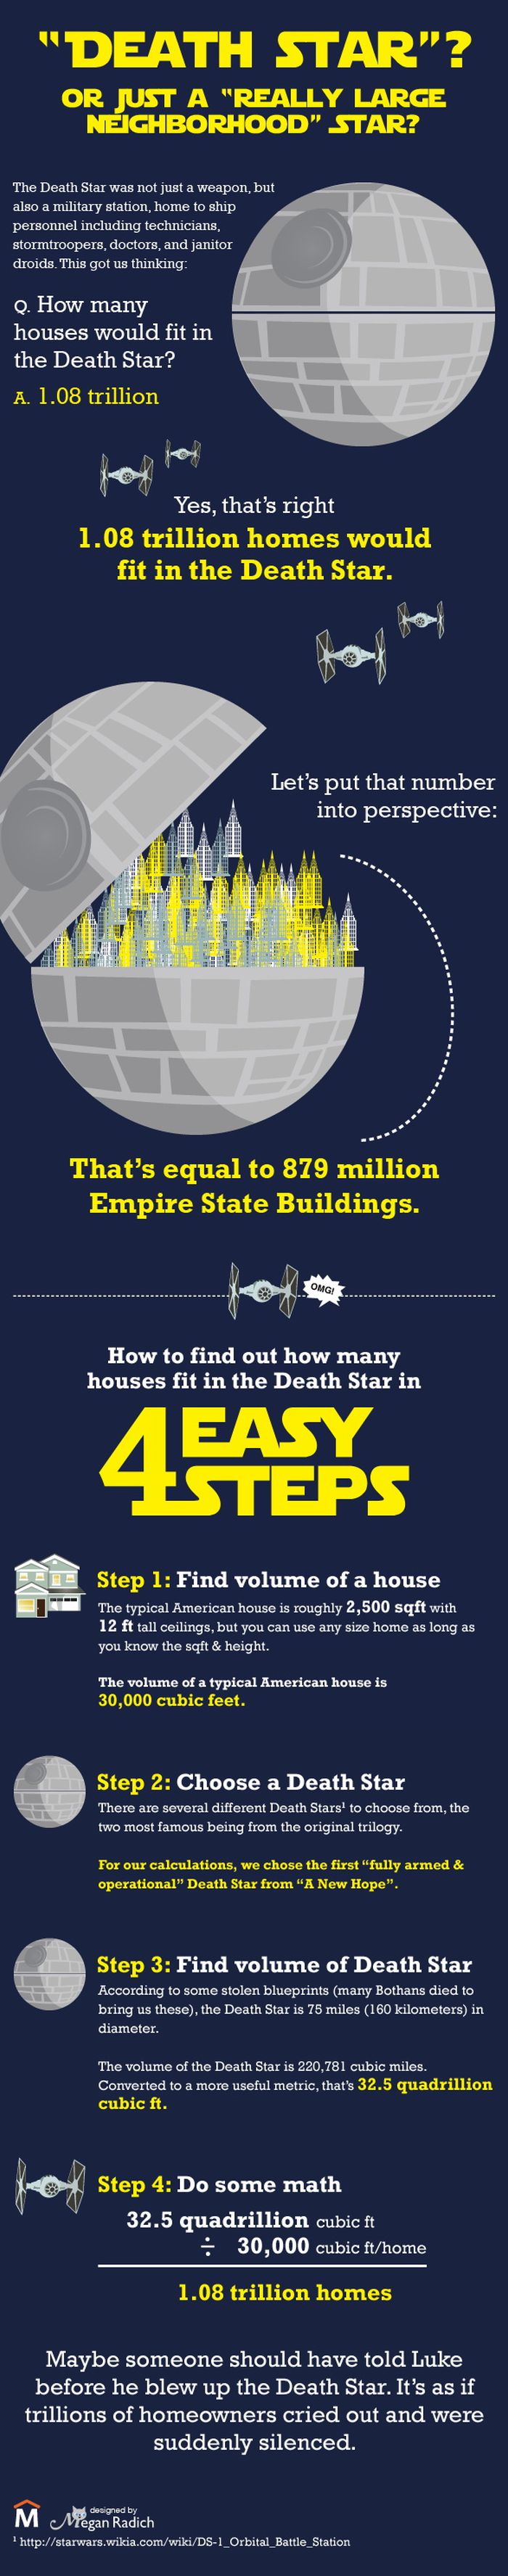 How Many Houses Can You Fit in a Death Star? (infographic)